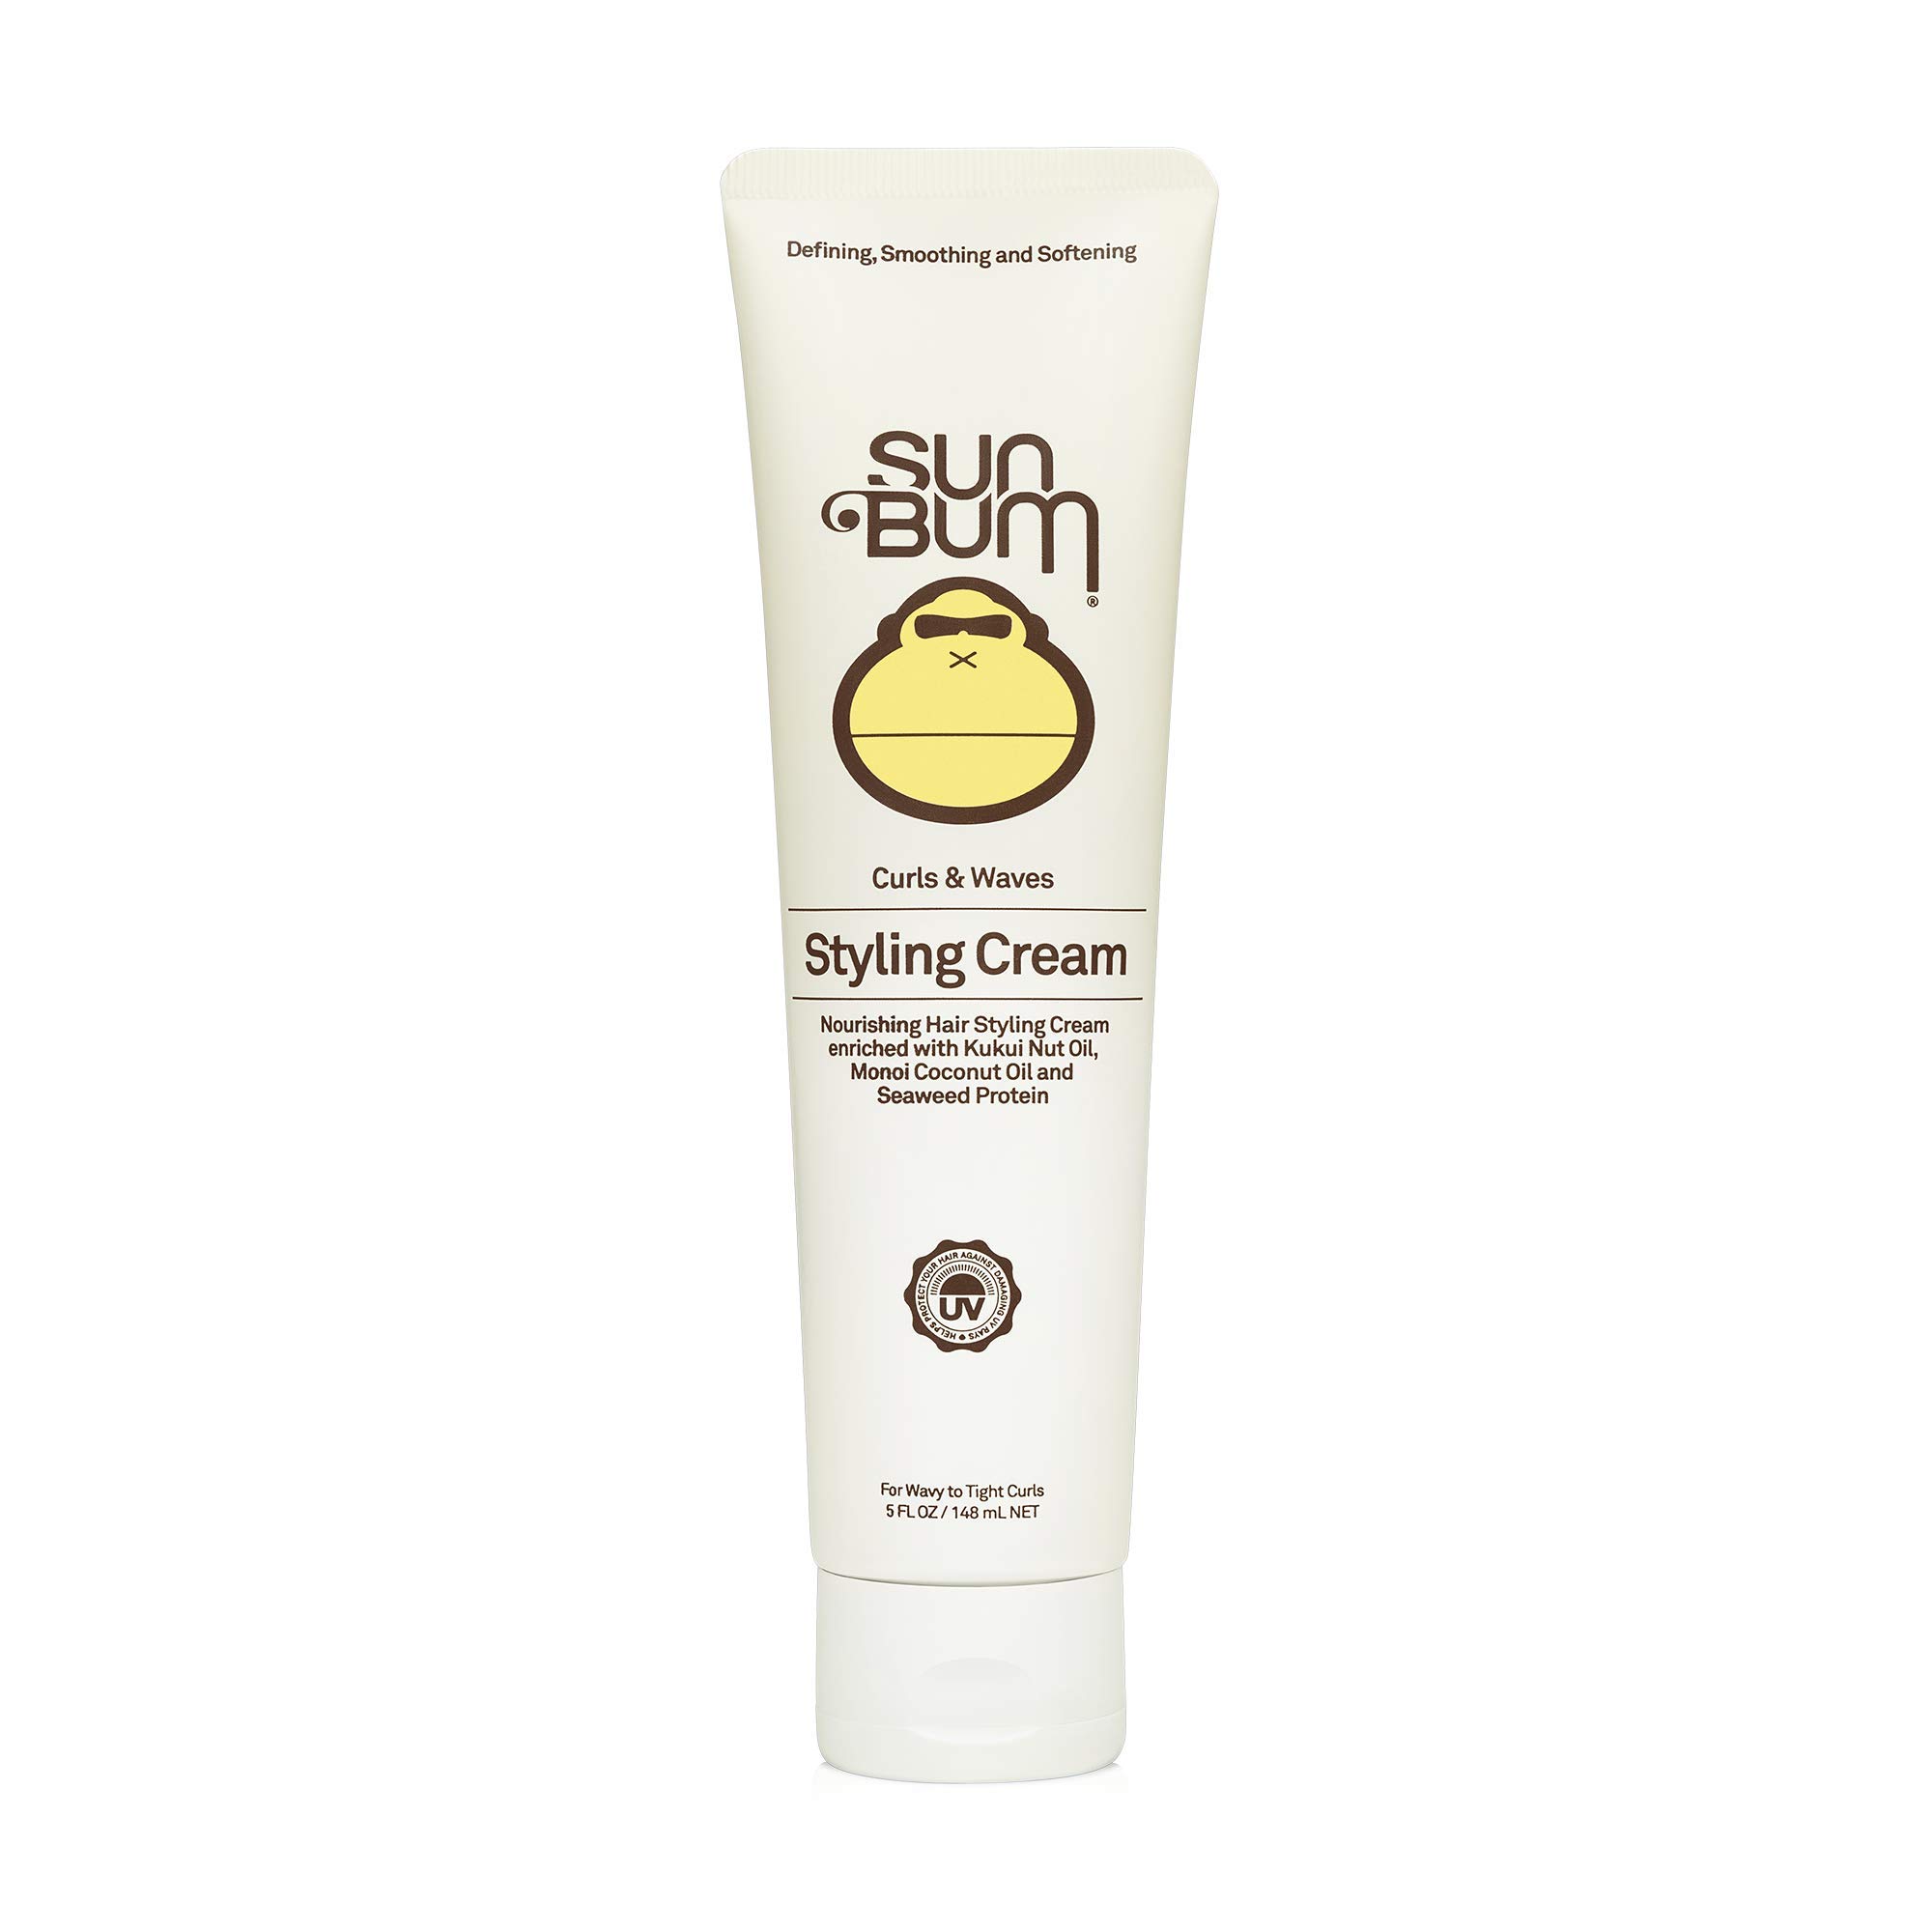 Sun Bum Curls & Waves Styling Cream | Vegan and Cruelty Free Moisturizing Hair Treatment for Wavy and Curly Hair | 5 oz